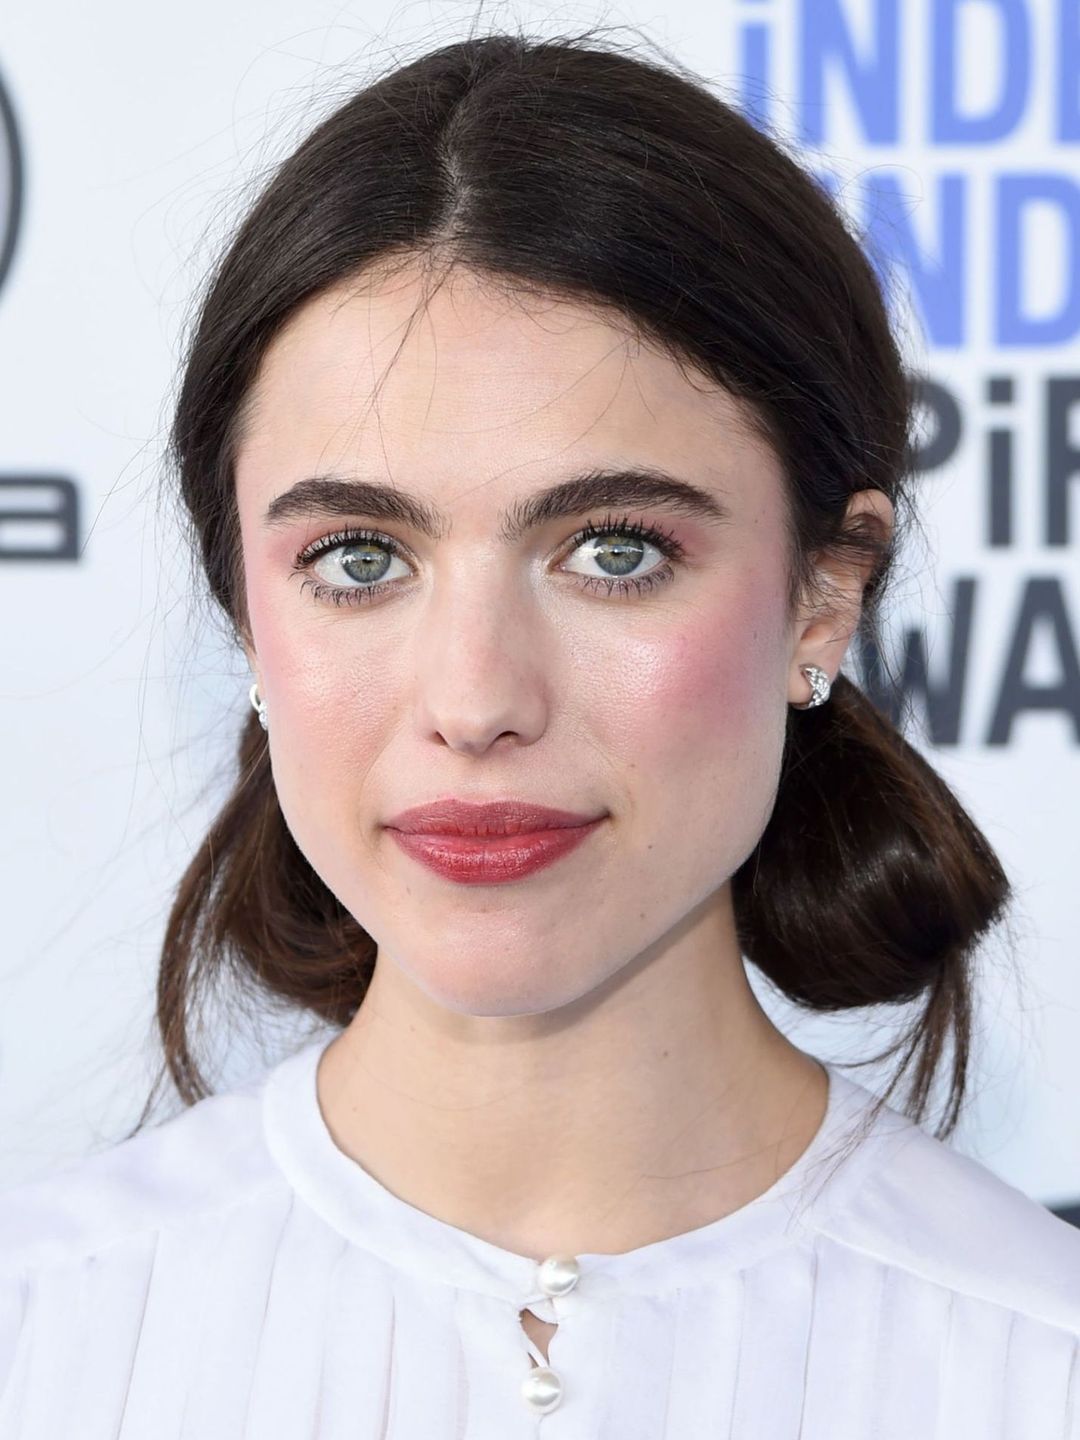 Margaret Qualley unphotoshopped pictures